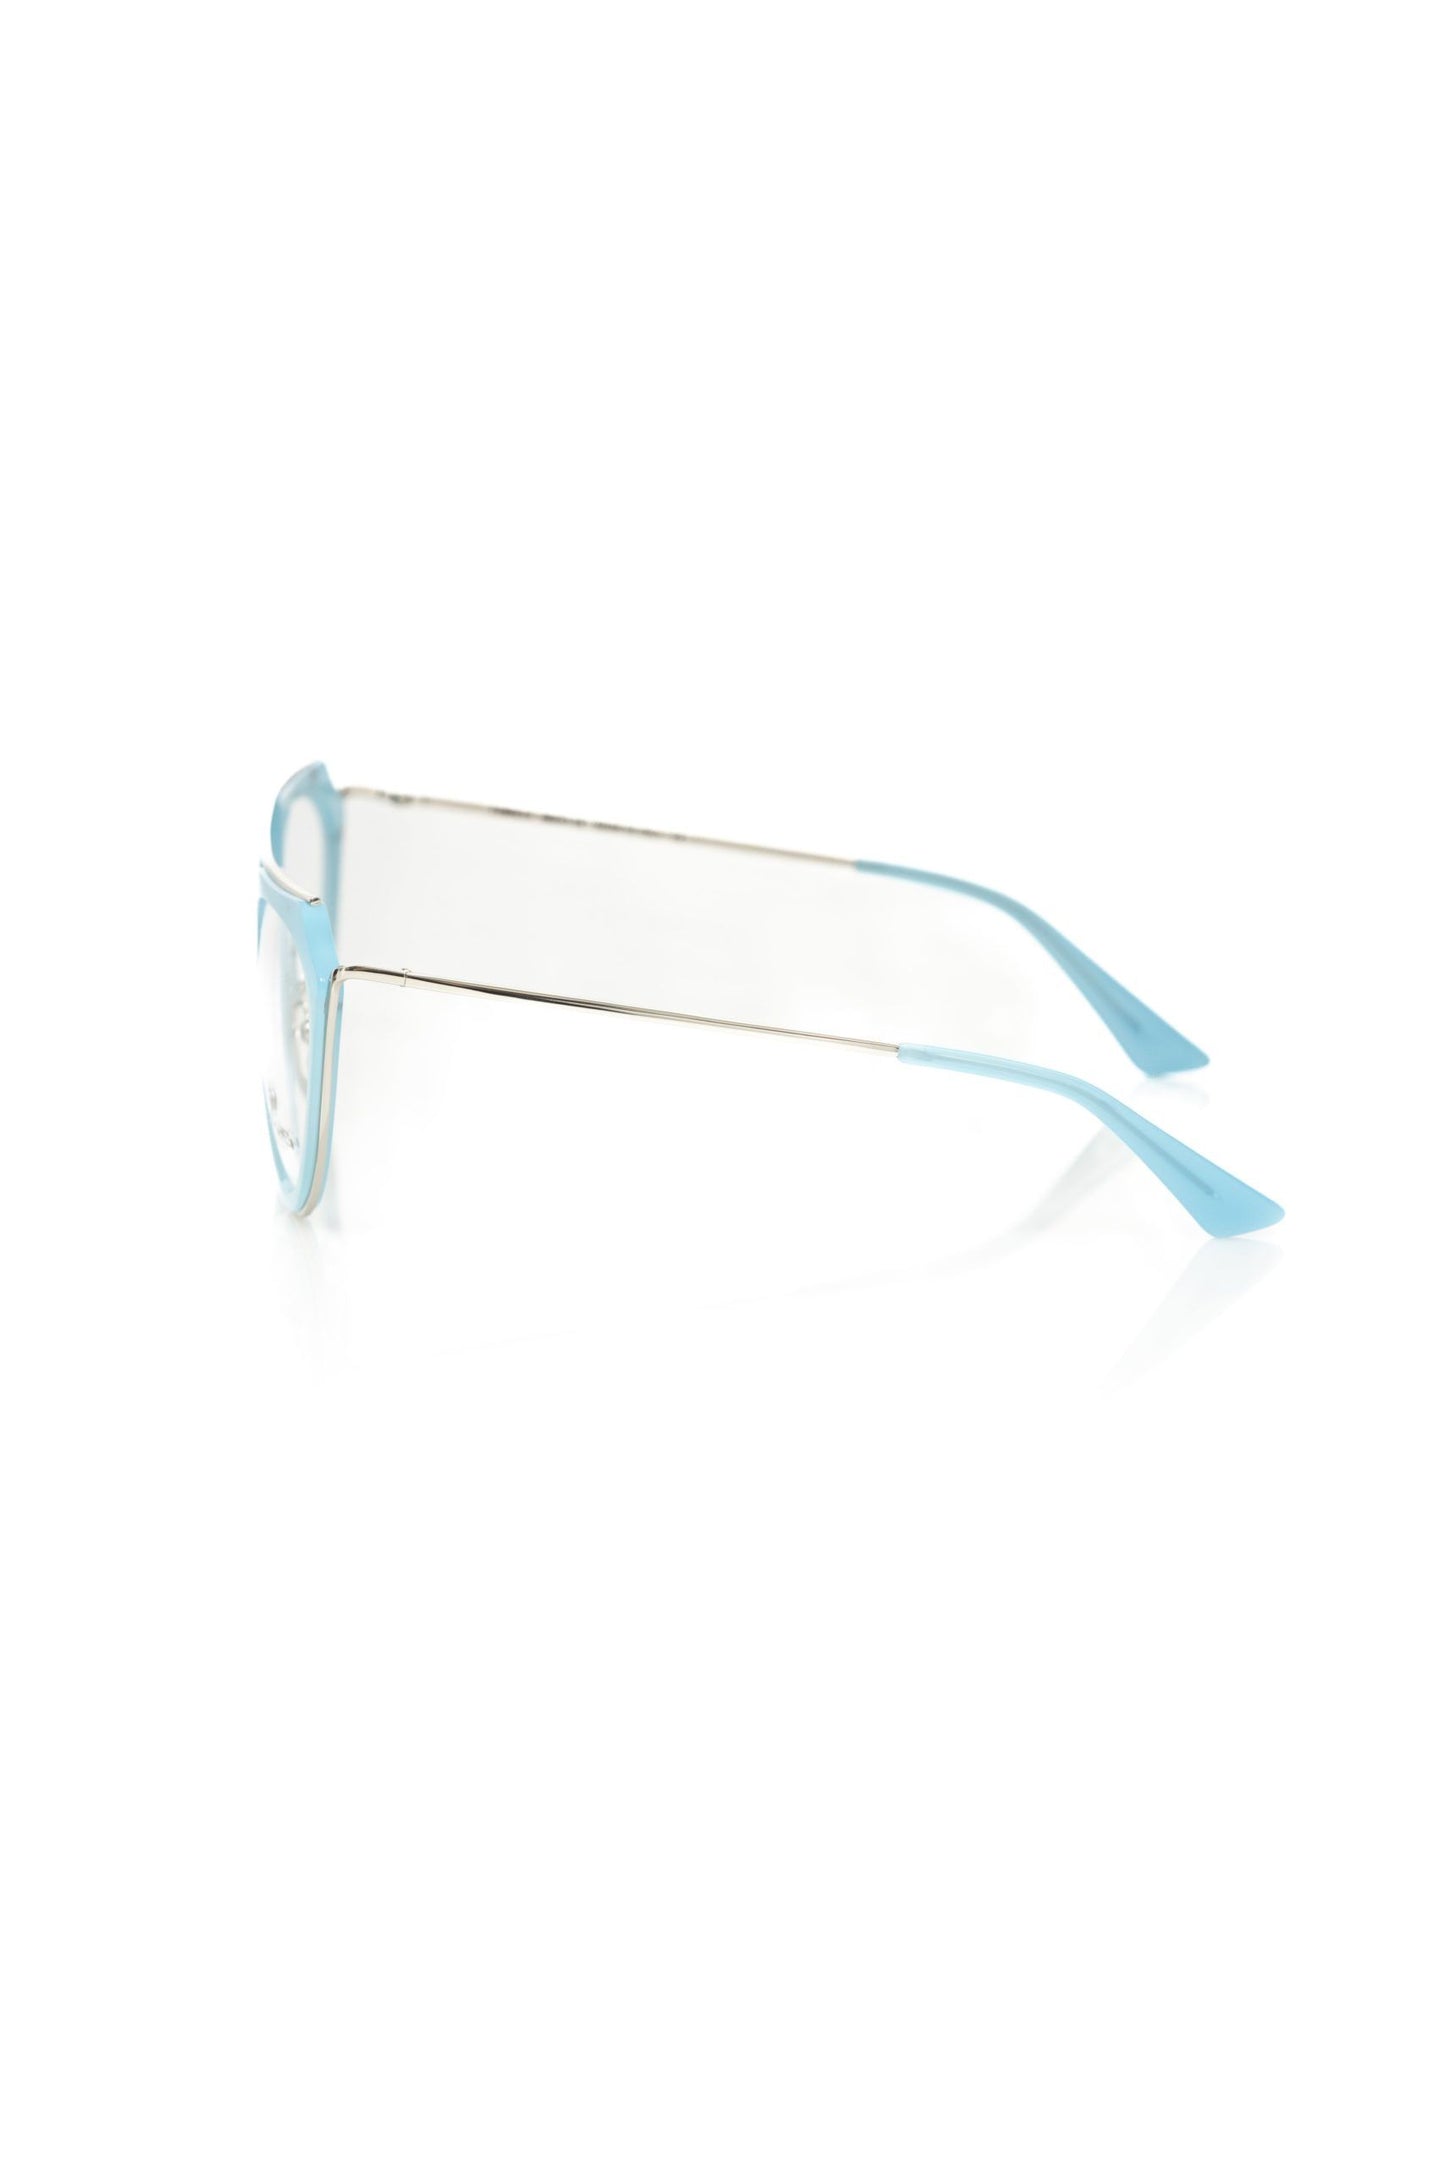 Frankie Morello FRMO-22100 Light Blue Acetate Frames - Designed by Frankie Morello Available to Buy at a Discounted Price on Moon Behind The Hill Online Designer Discount Store